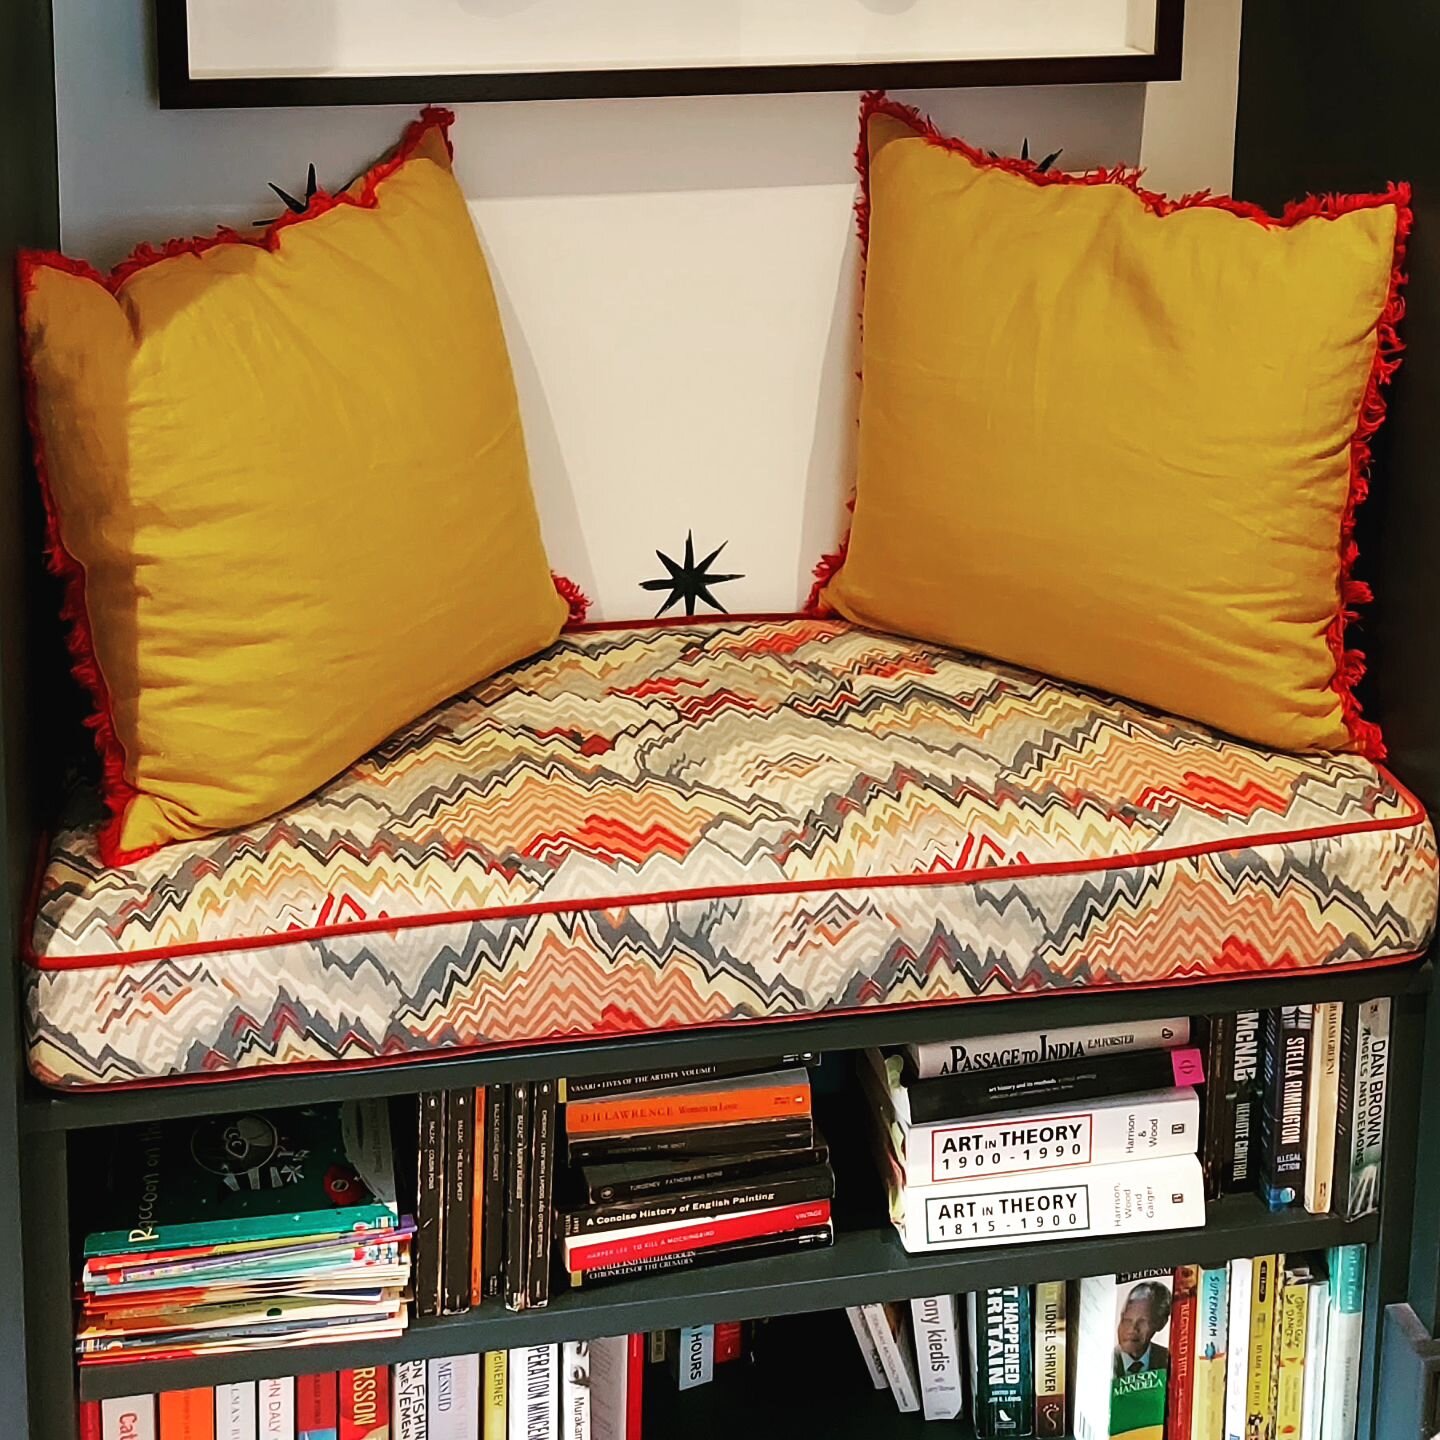 I love this little bedroom alcove.  Utilising all the space and providing the perfect spot to curl up with a book on this comfy cushion.  Good for the rain today, that's for sure.

#readingknook #alcove #seatcushion #bedroominspo #bedroomideas ##coun